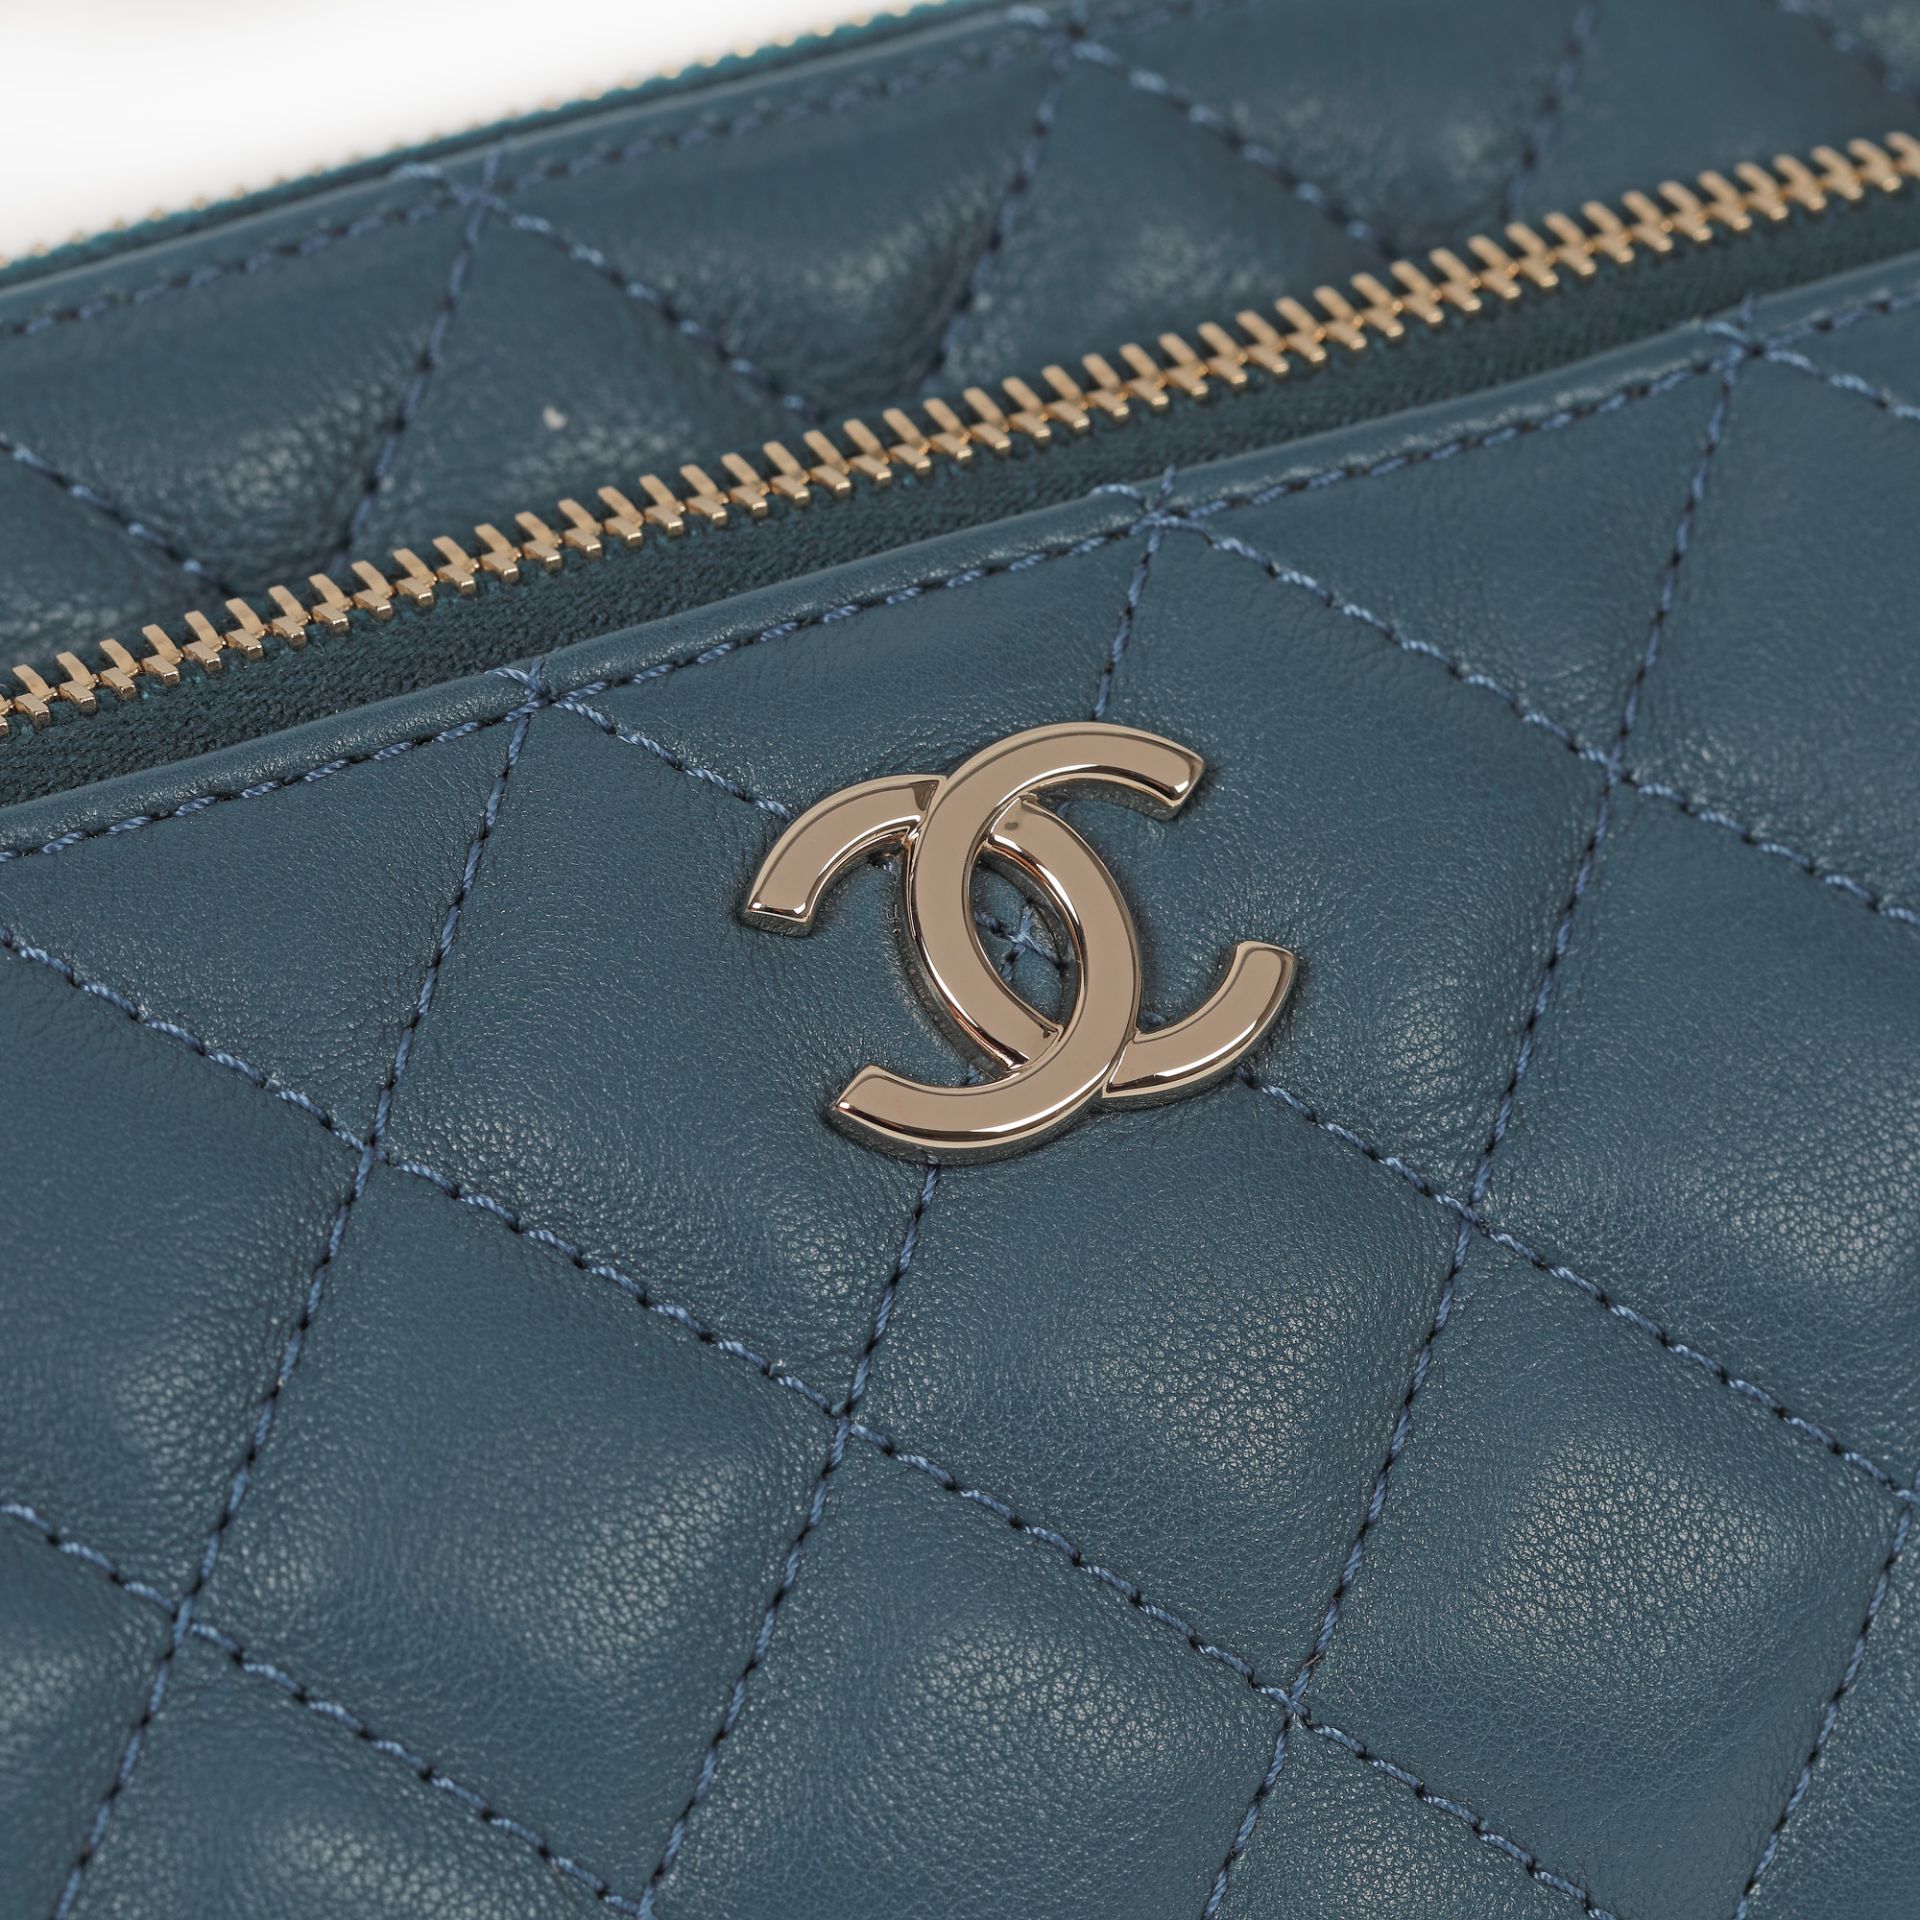 Chanel carrying case, quilted leather, blue - Image 2 of 5